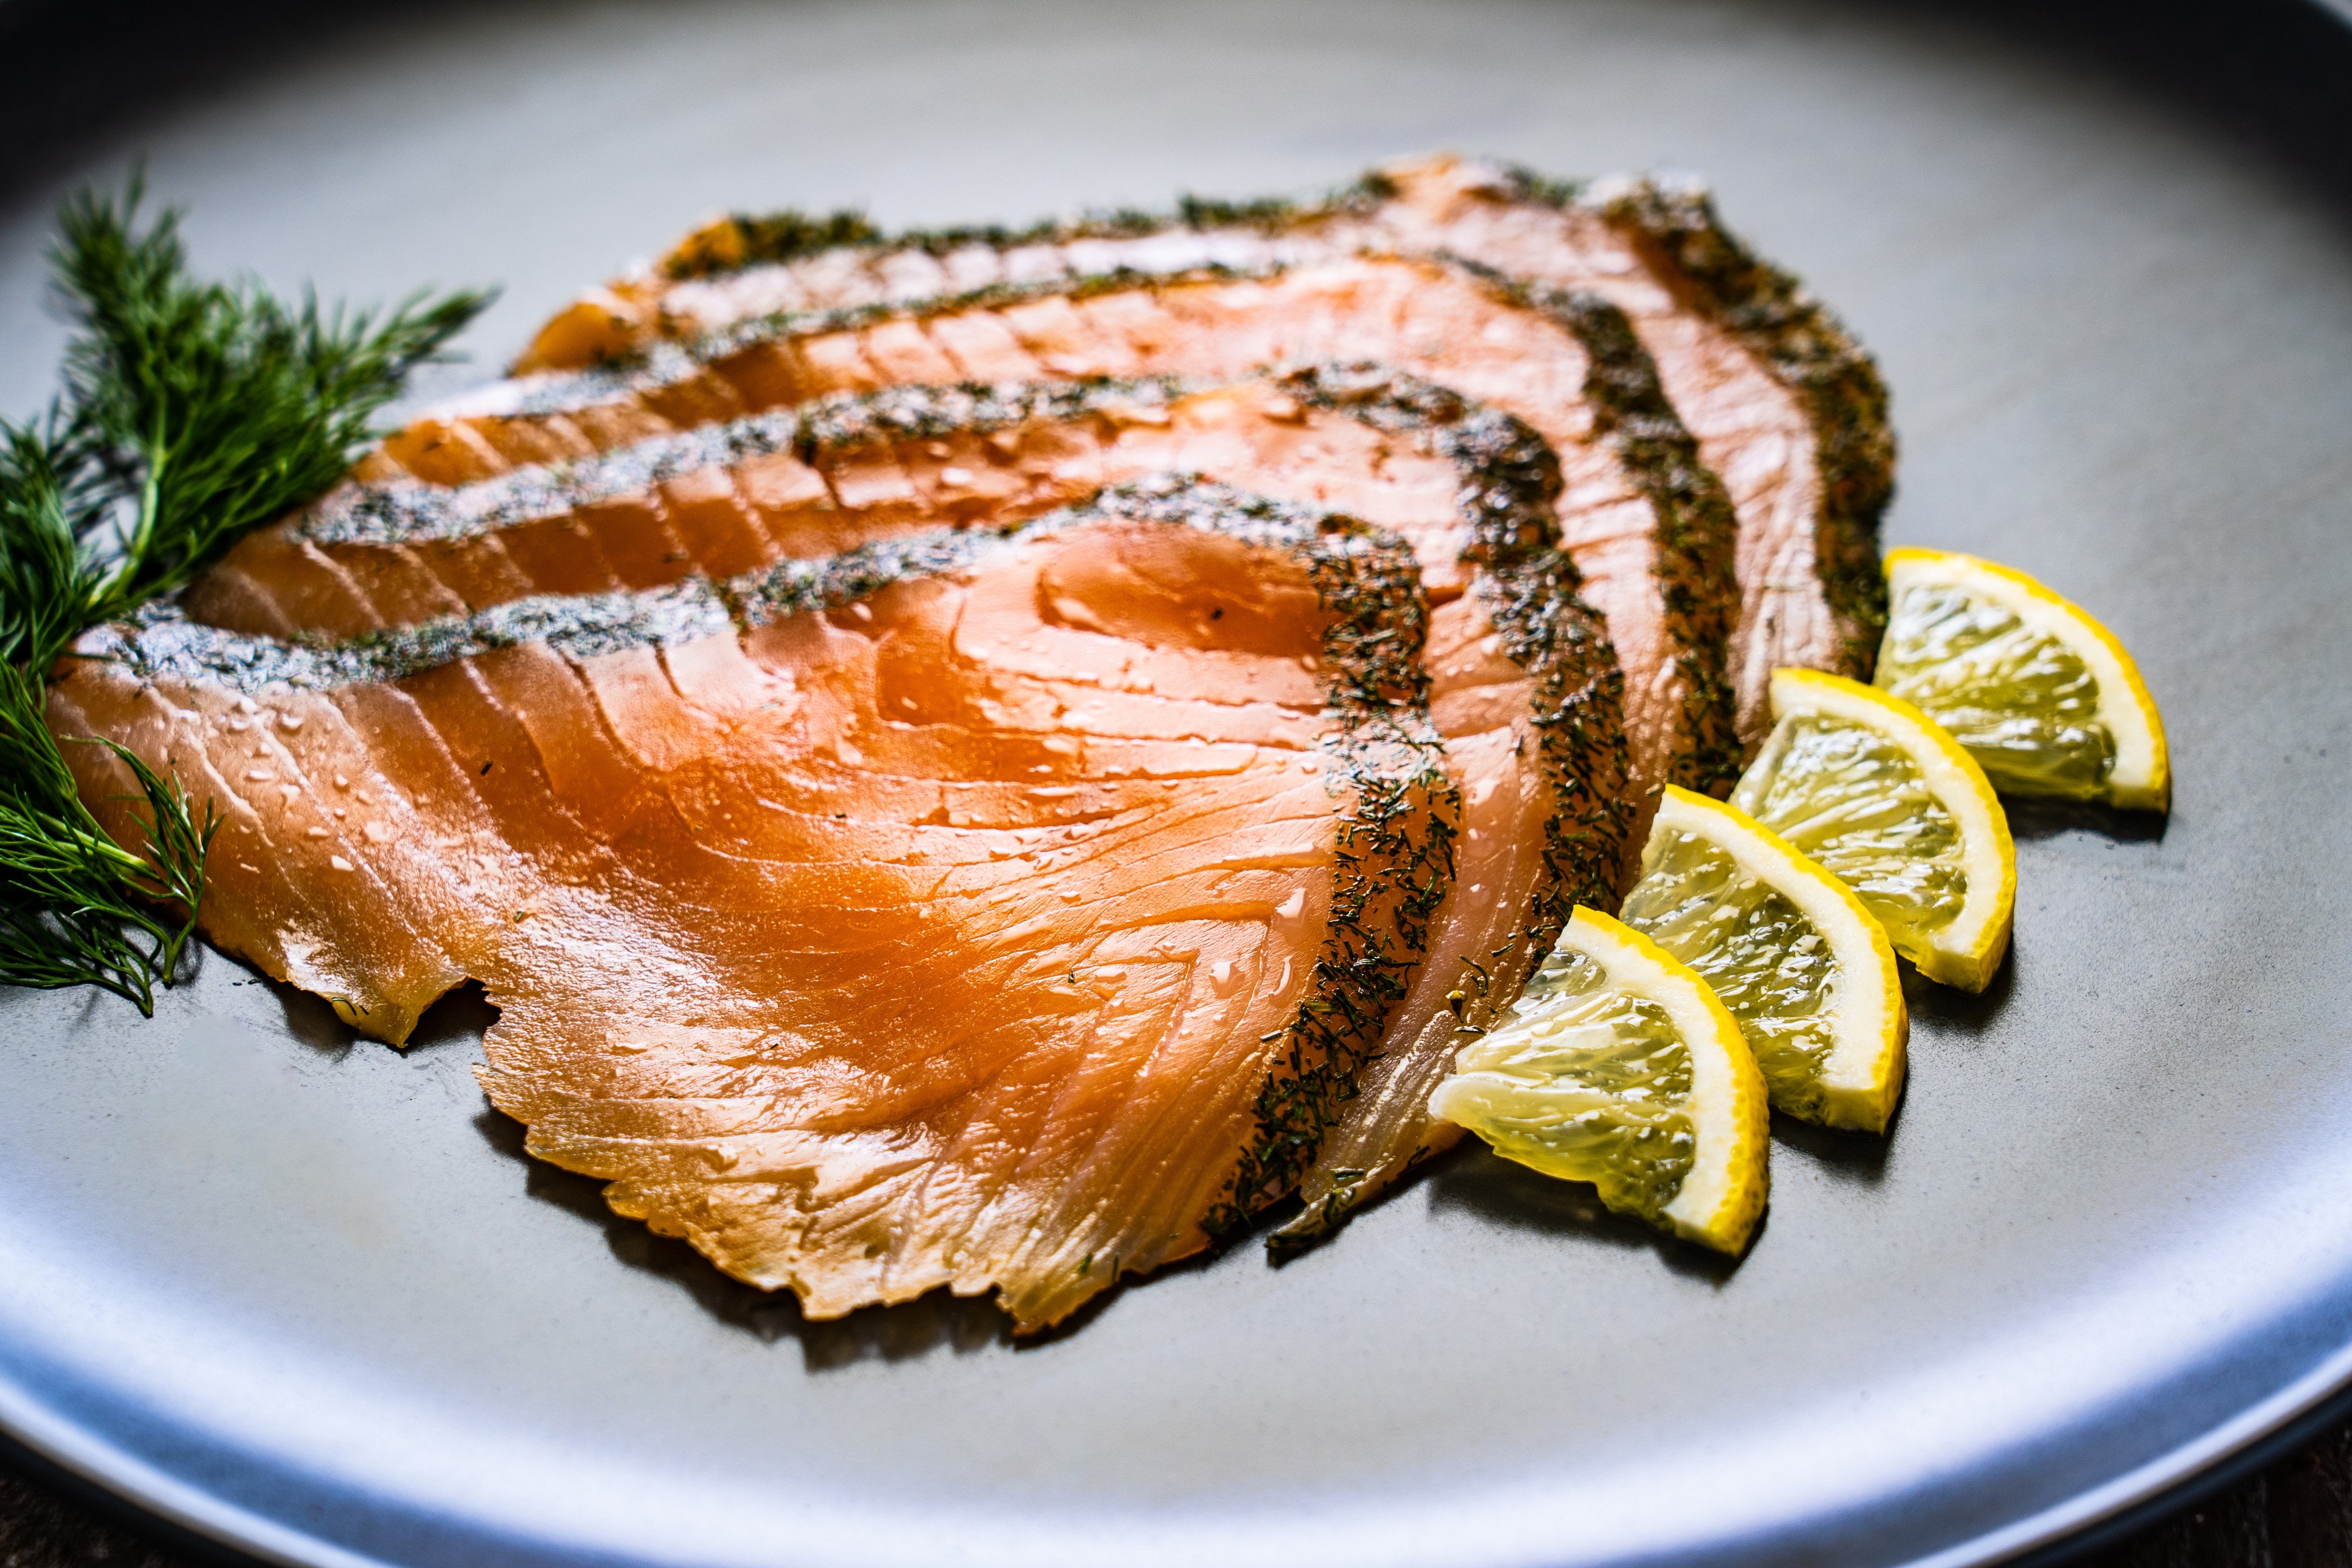 Smoked salmon with dill and lemon. Not all smoked salmon is cooked, and that means it needs handling with care and that some people should avoid eating it, according to food safety experts. Photo: Shutterstock